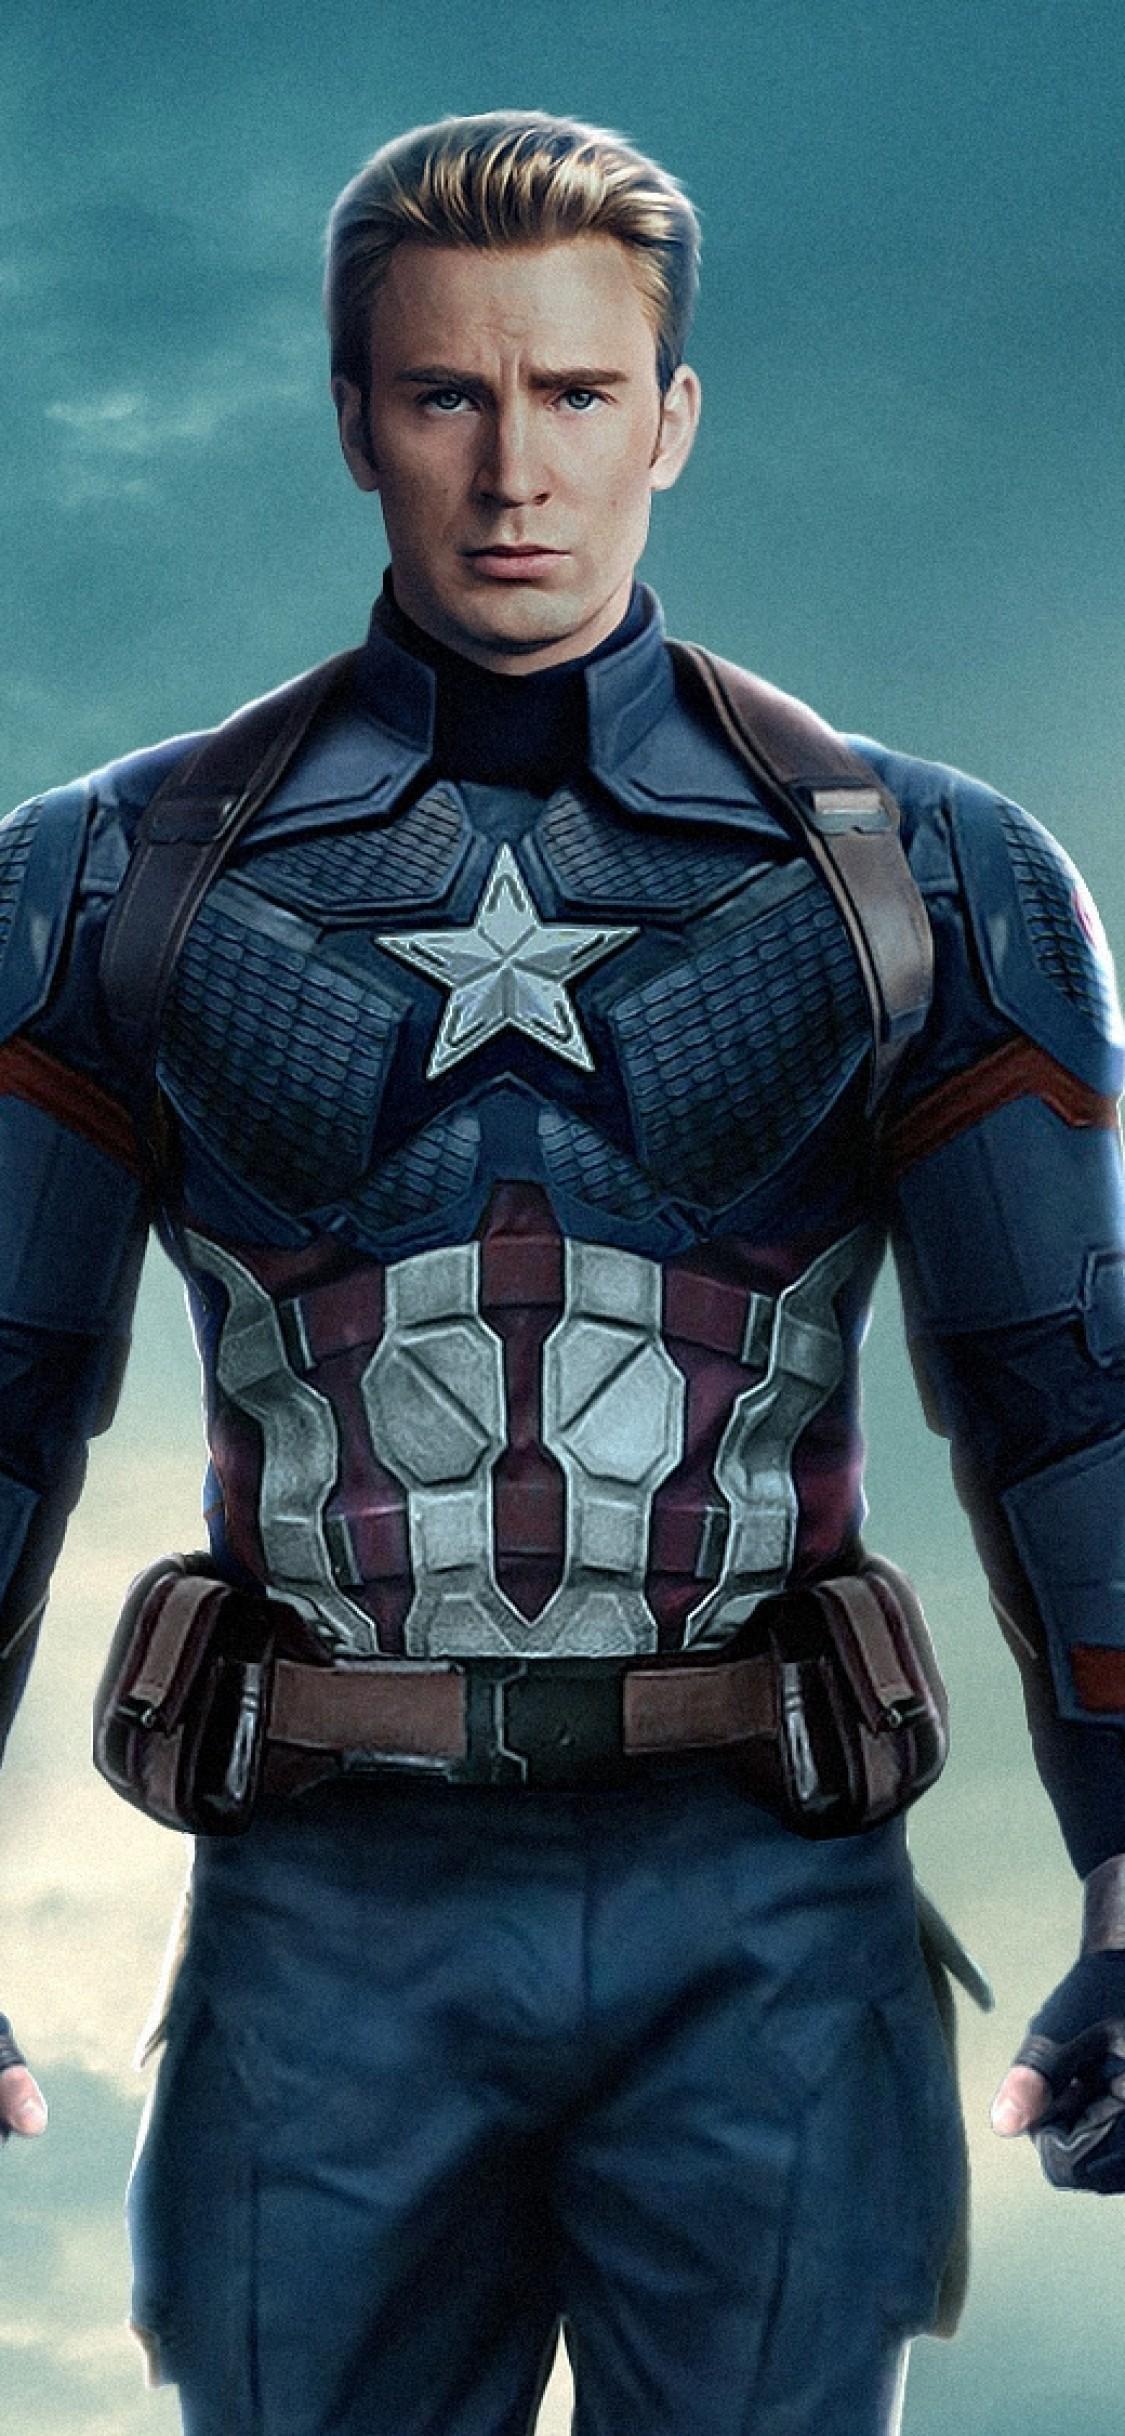 Download 1125x2436 Captain America: The Winter Soldier, Chris